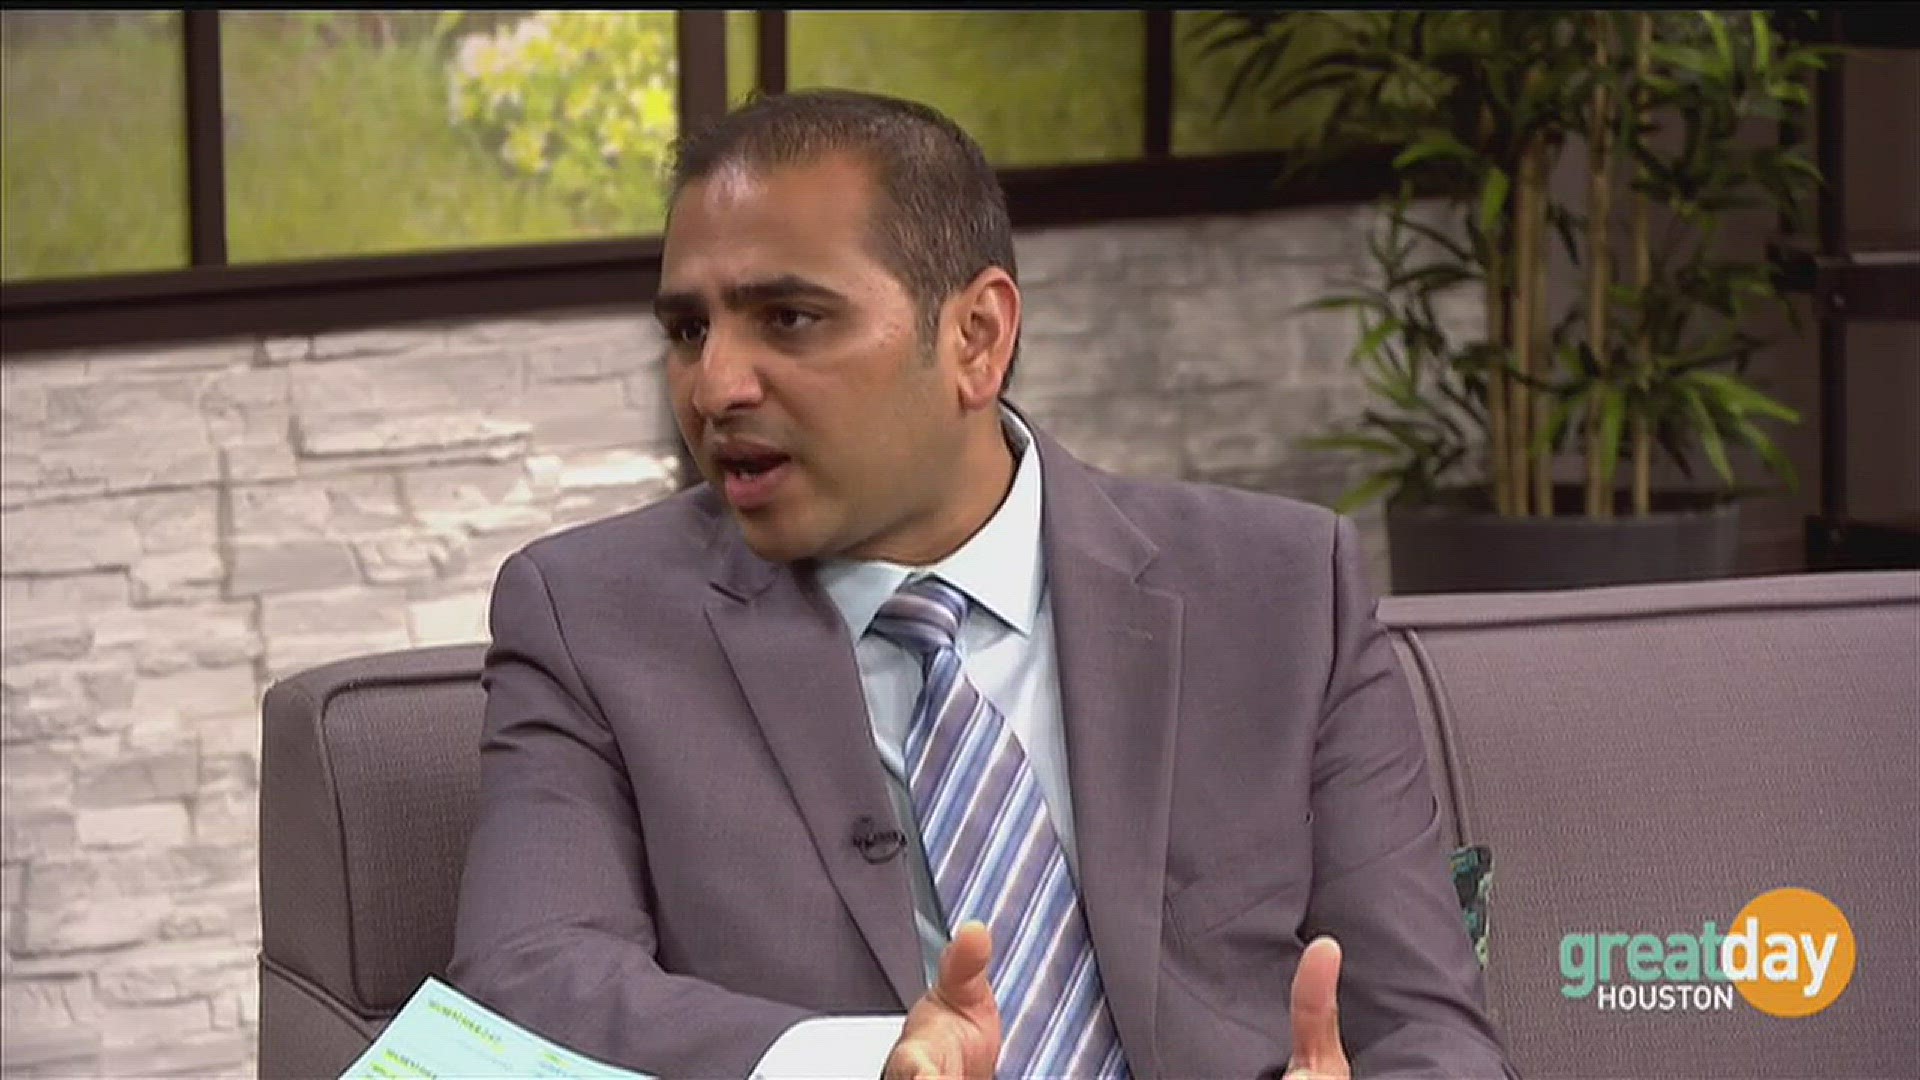 Dr. Niral Patel explains the difference between the E.R. and urgent care and the benefits of Memorial Hermann Urgent Care.